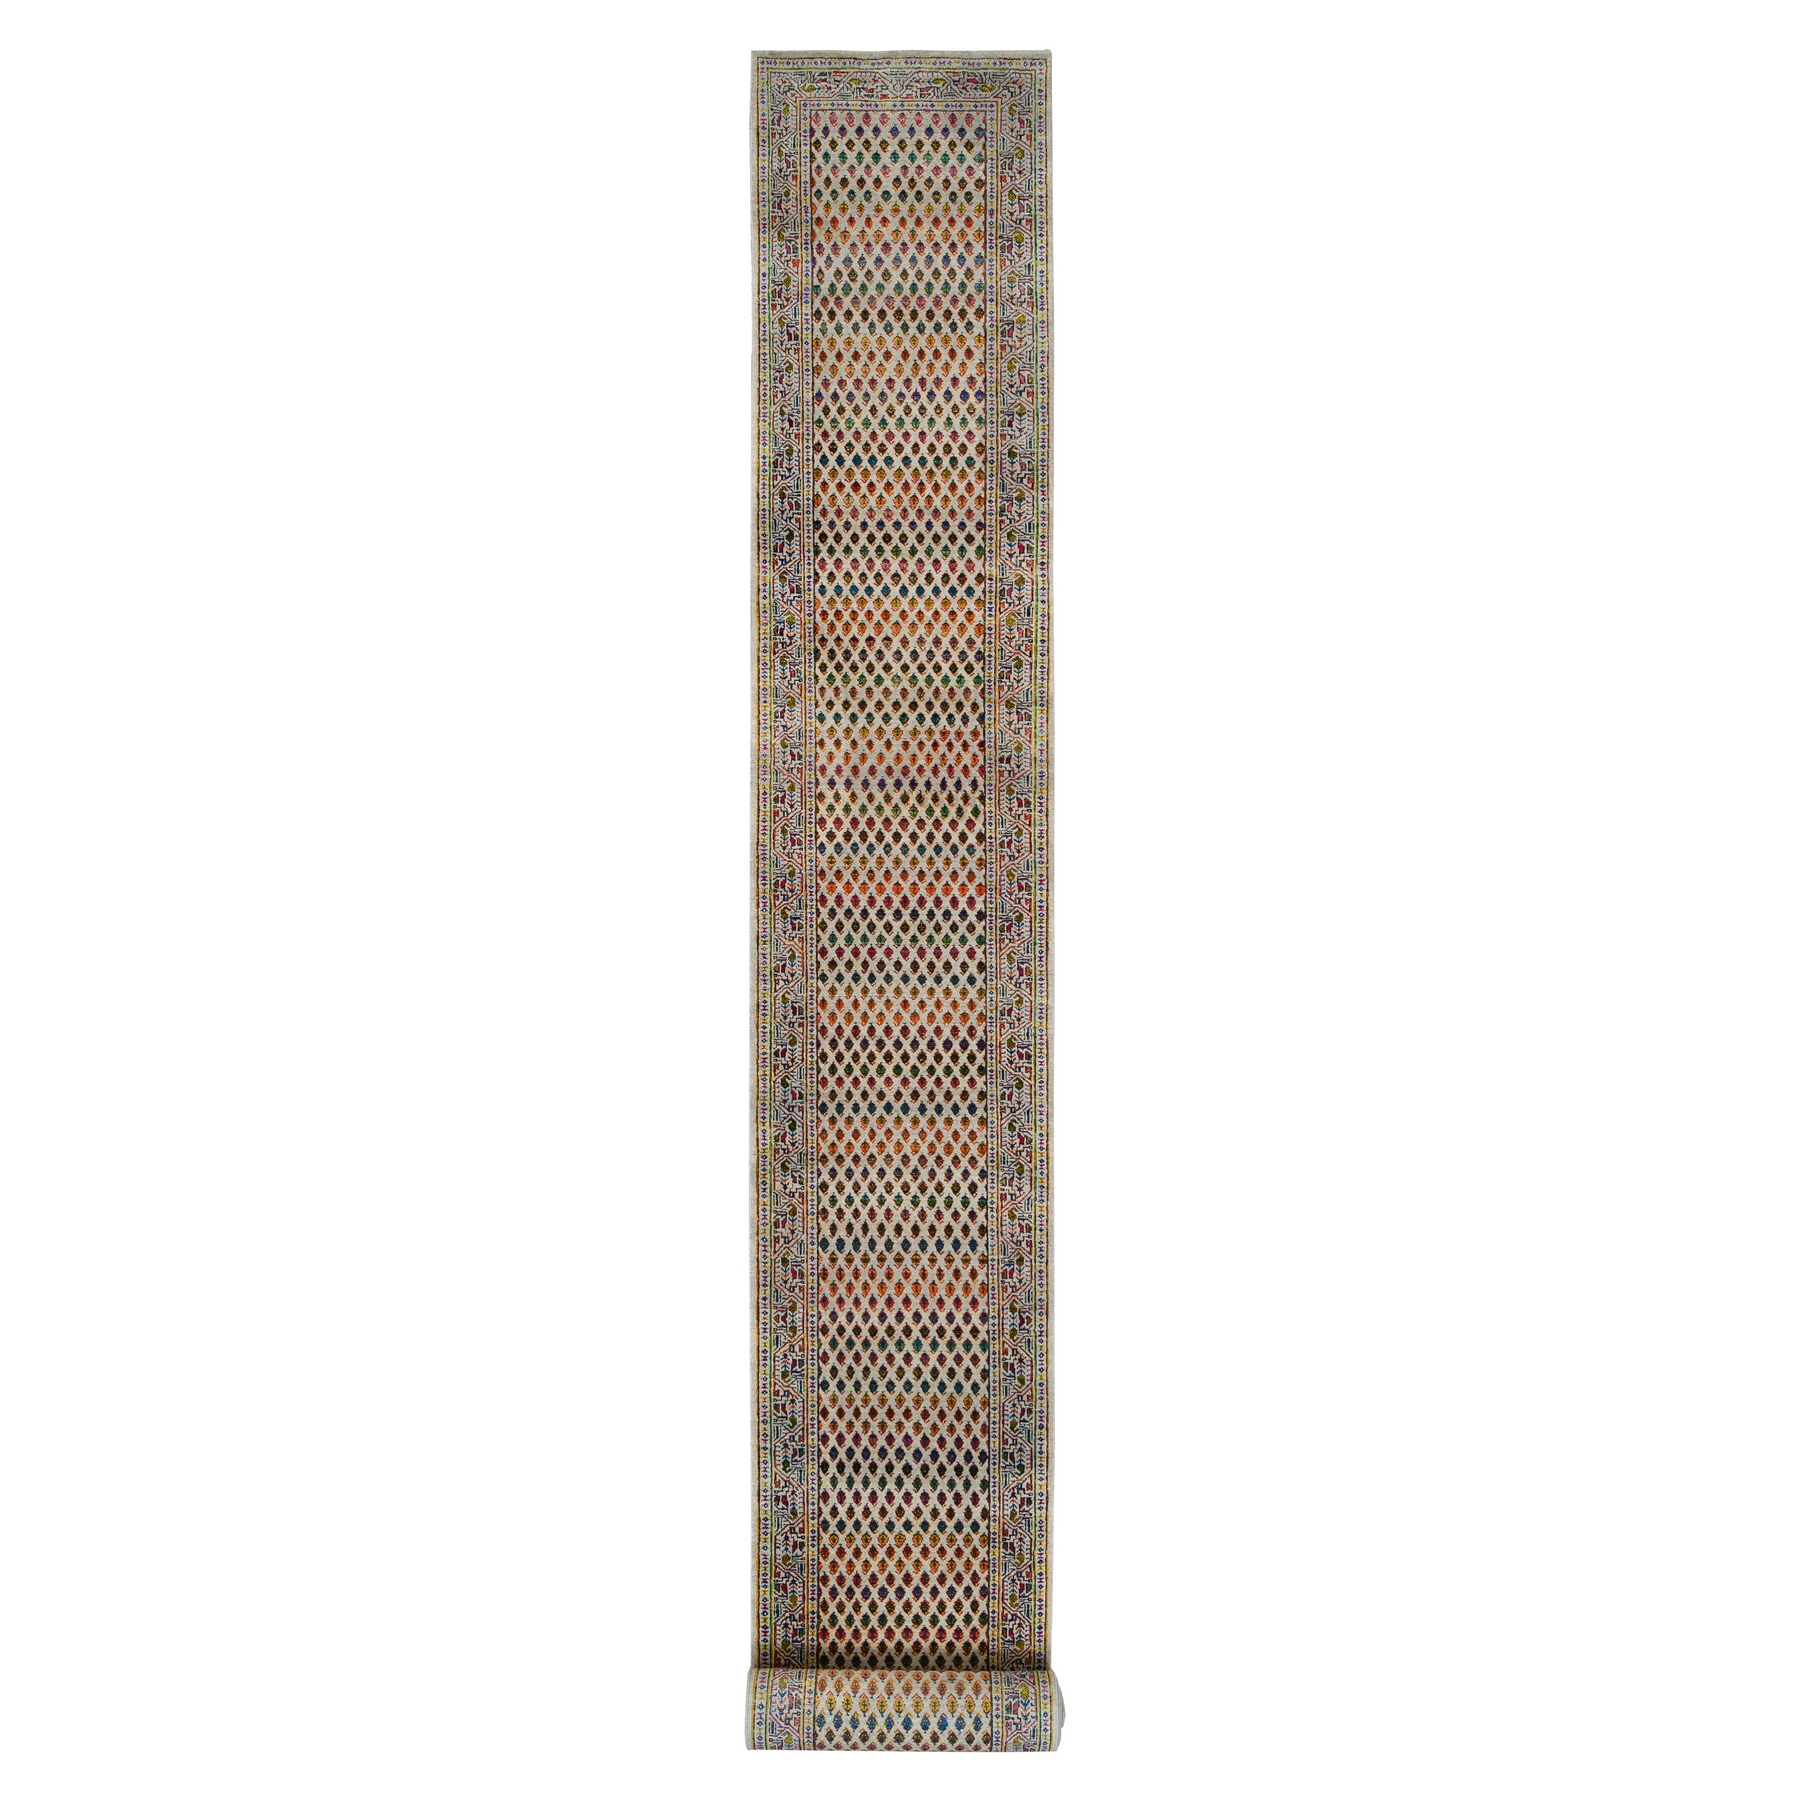 Shop Runner 22-Ft Rugs at Affordable Prices Online - iluvrugs